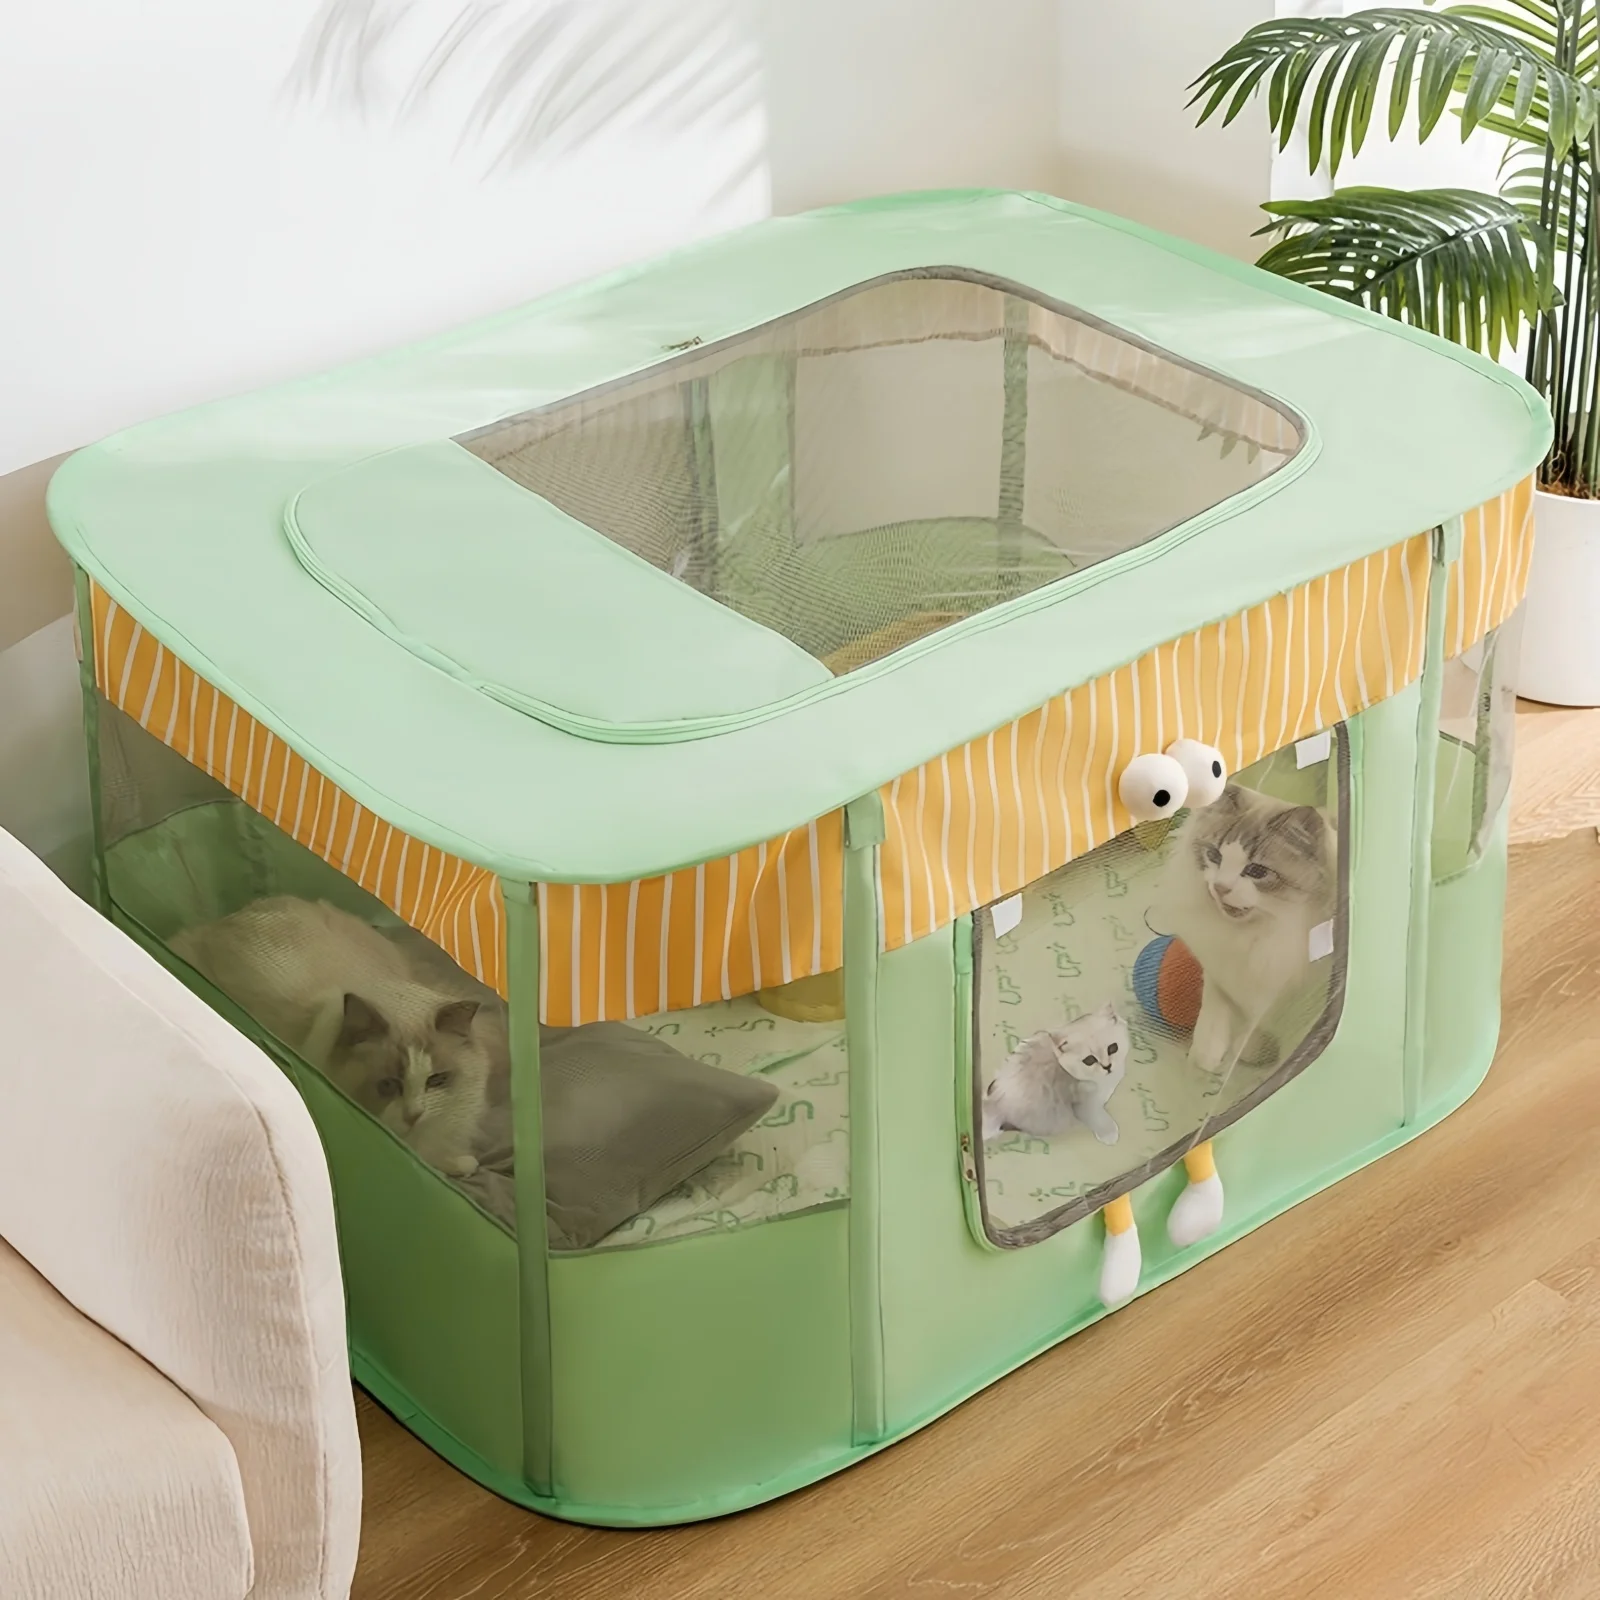 

Foldable Pet Cat Delivery Room Cat Nest Rectangular Cage Portable Dogs Cats Production Tent Breeding Waiting Box Pet Supplies